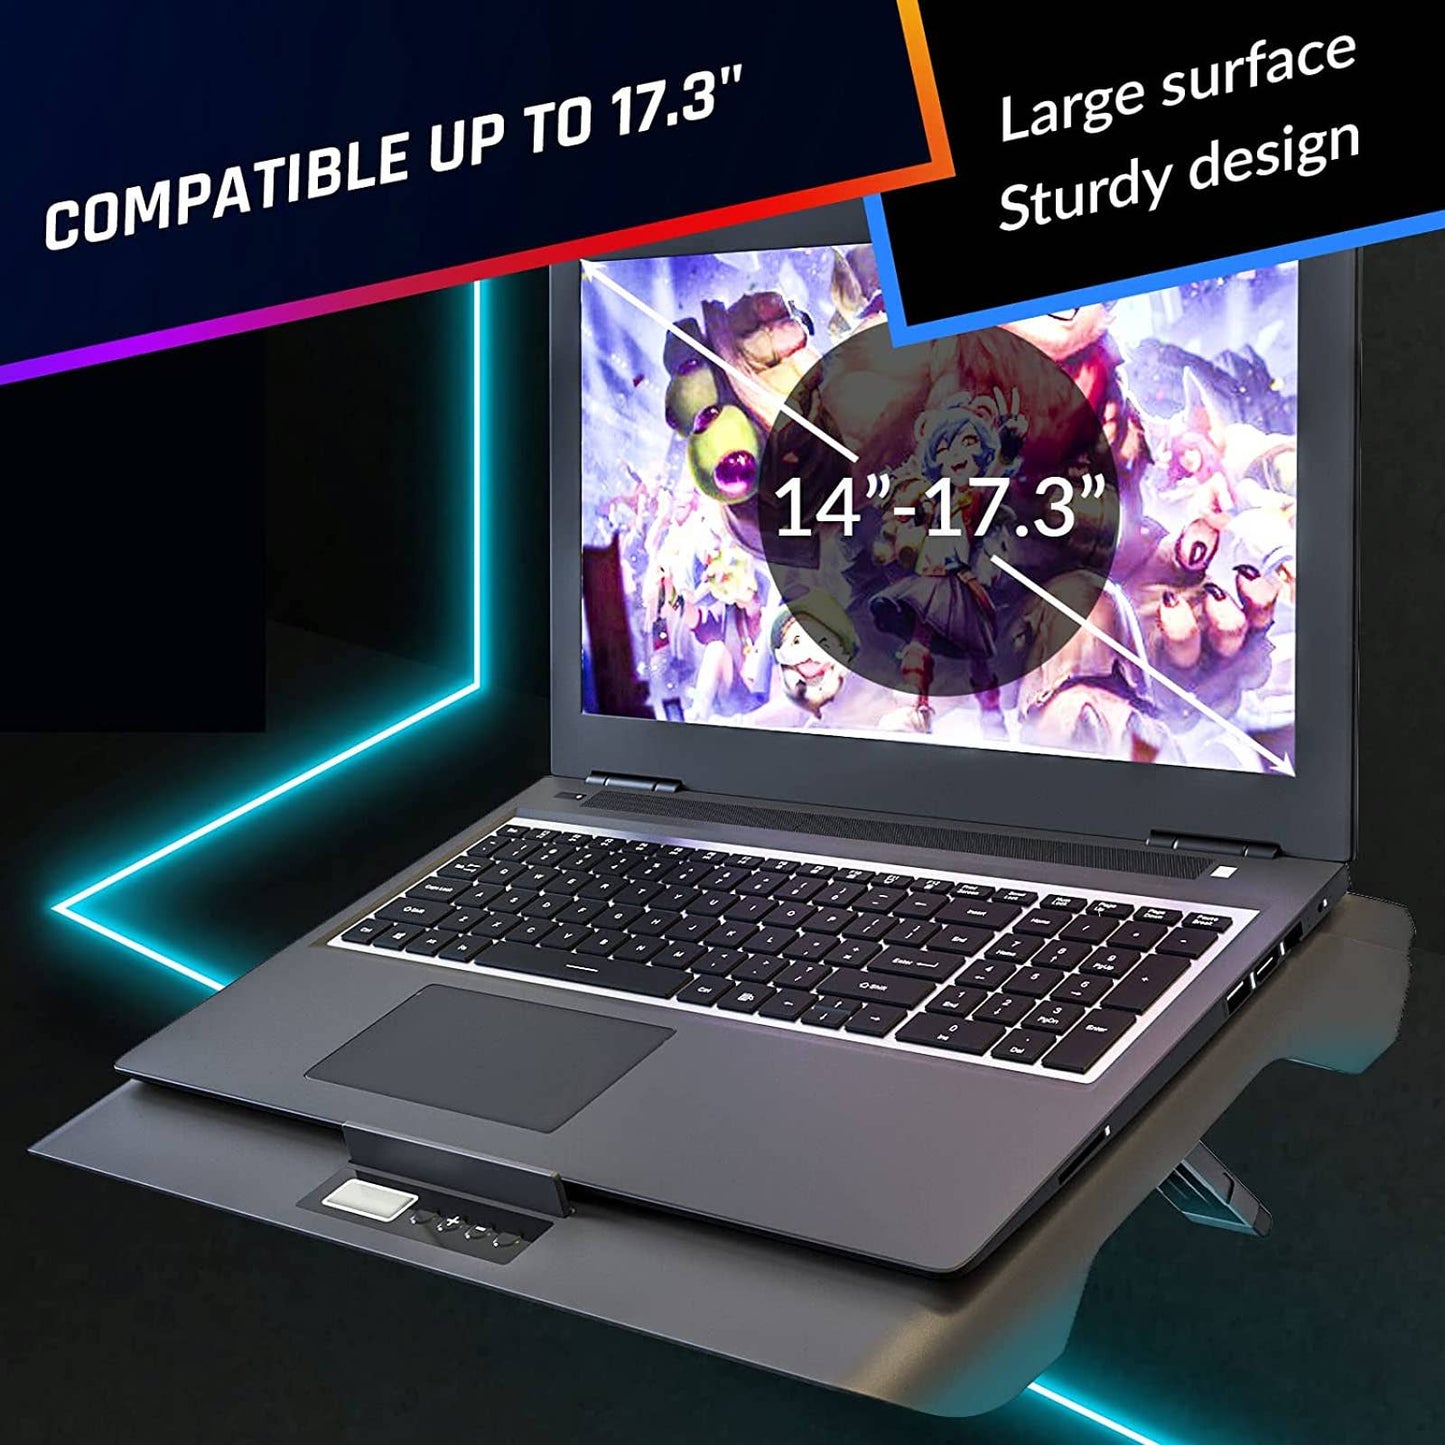 Laptop Cooling Pad - I personally use This and LOVE IT